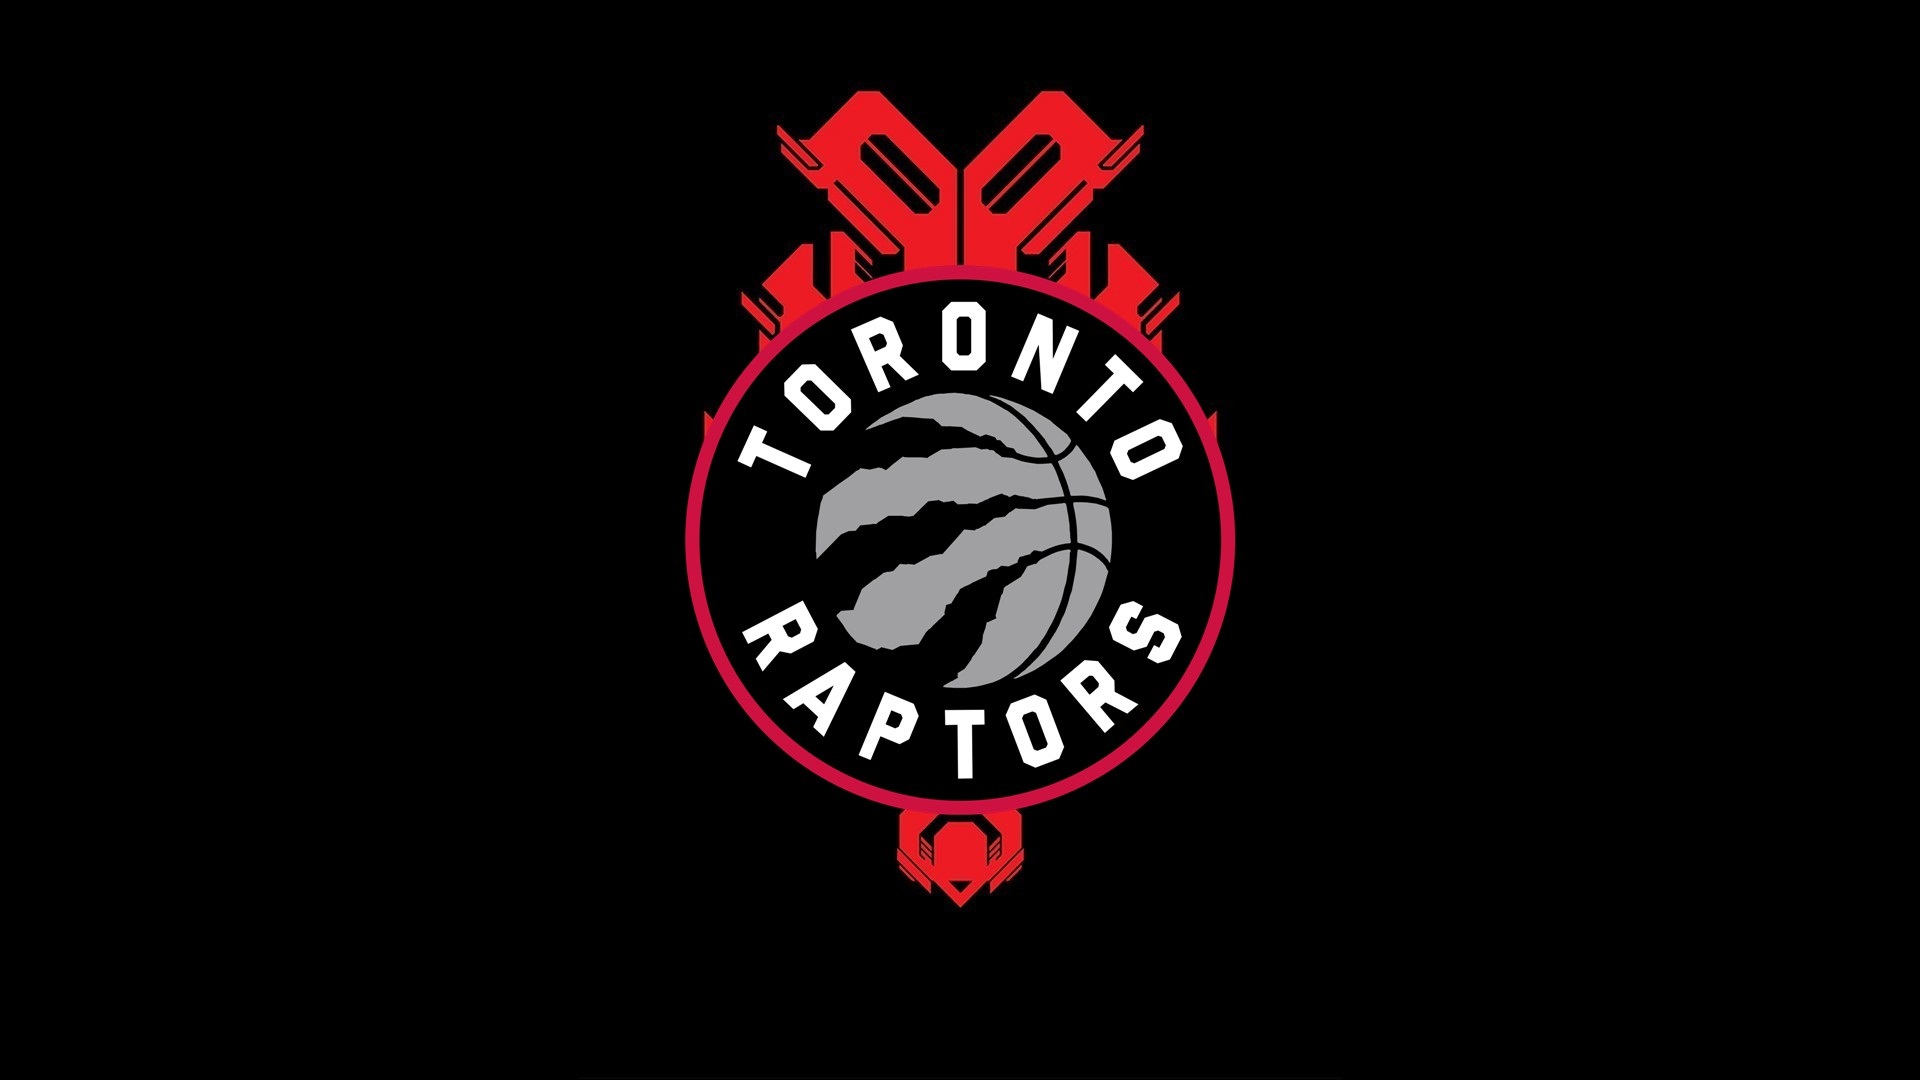 Toronto Raptors Background Wallpaper HD with image resolution 1920x1080 pixel. You can make this wallpaper for your Desktop Computer Backgrounds, Mac Wallpapers, Android Lock screen or iPhone Screensavers